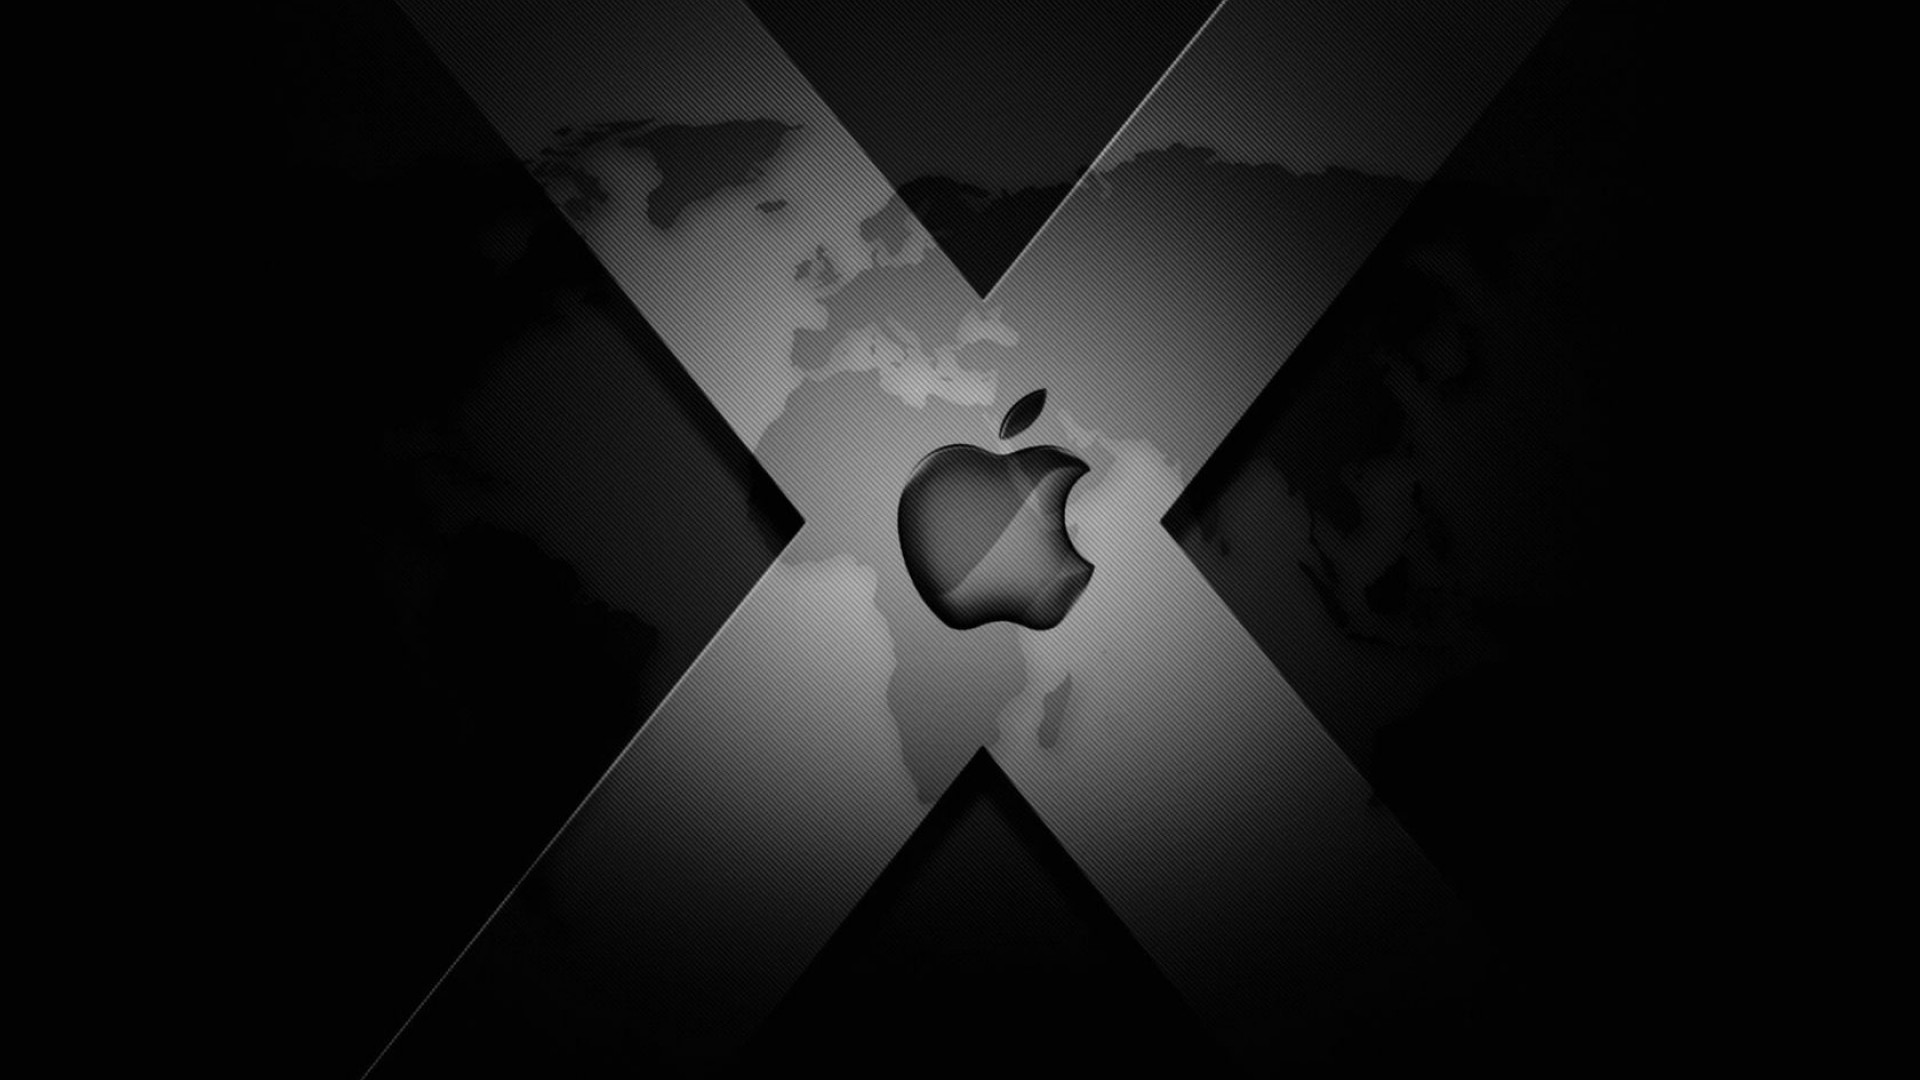 1920x1080 Free Big X Apple logo iPhone 6 Wallpapers, iPhone 6 Wallpapers. See more  about HD iphone 6 wallpaper, Pattern wallpaper and iPhone 6 Backgrounds.